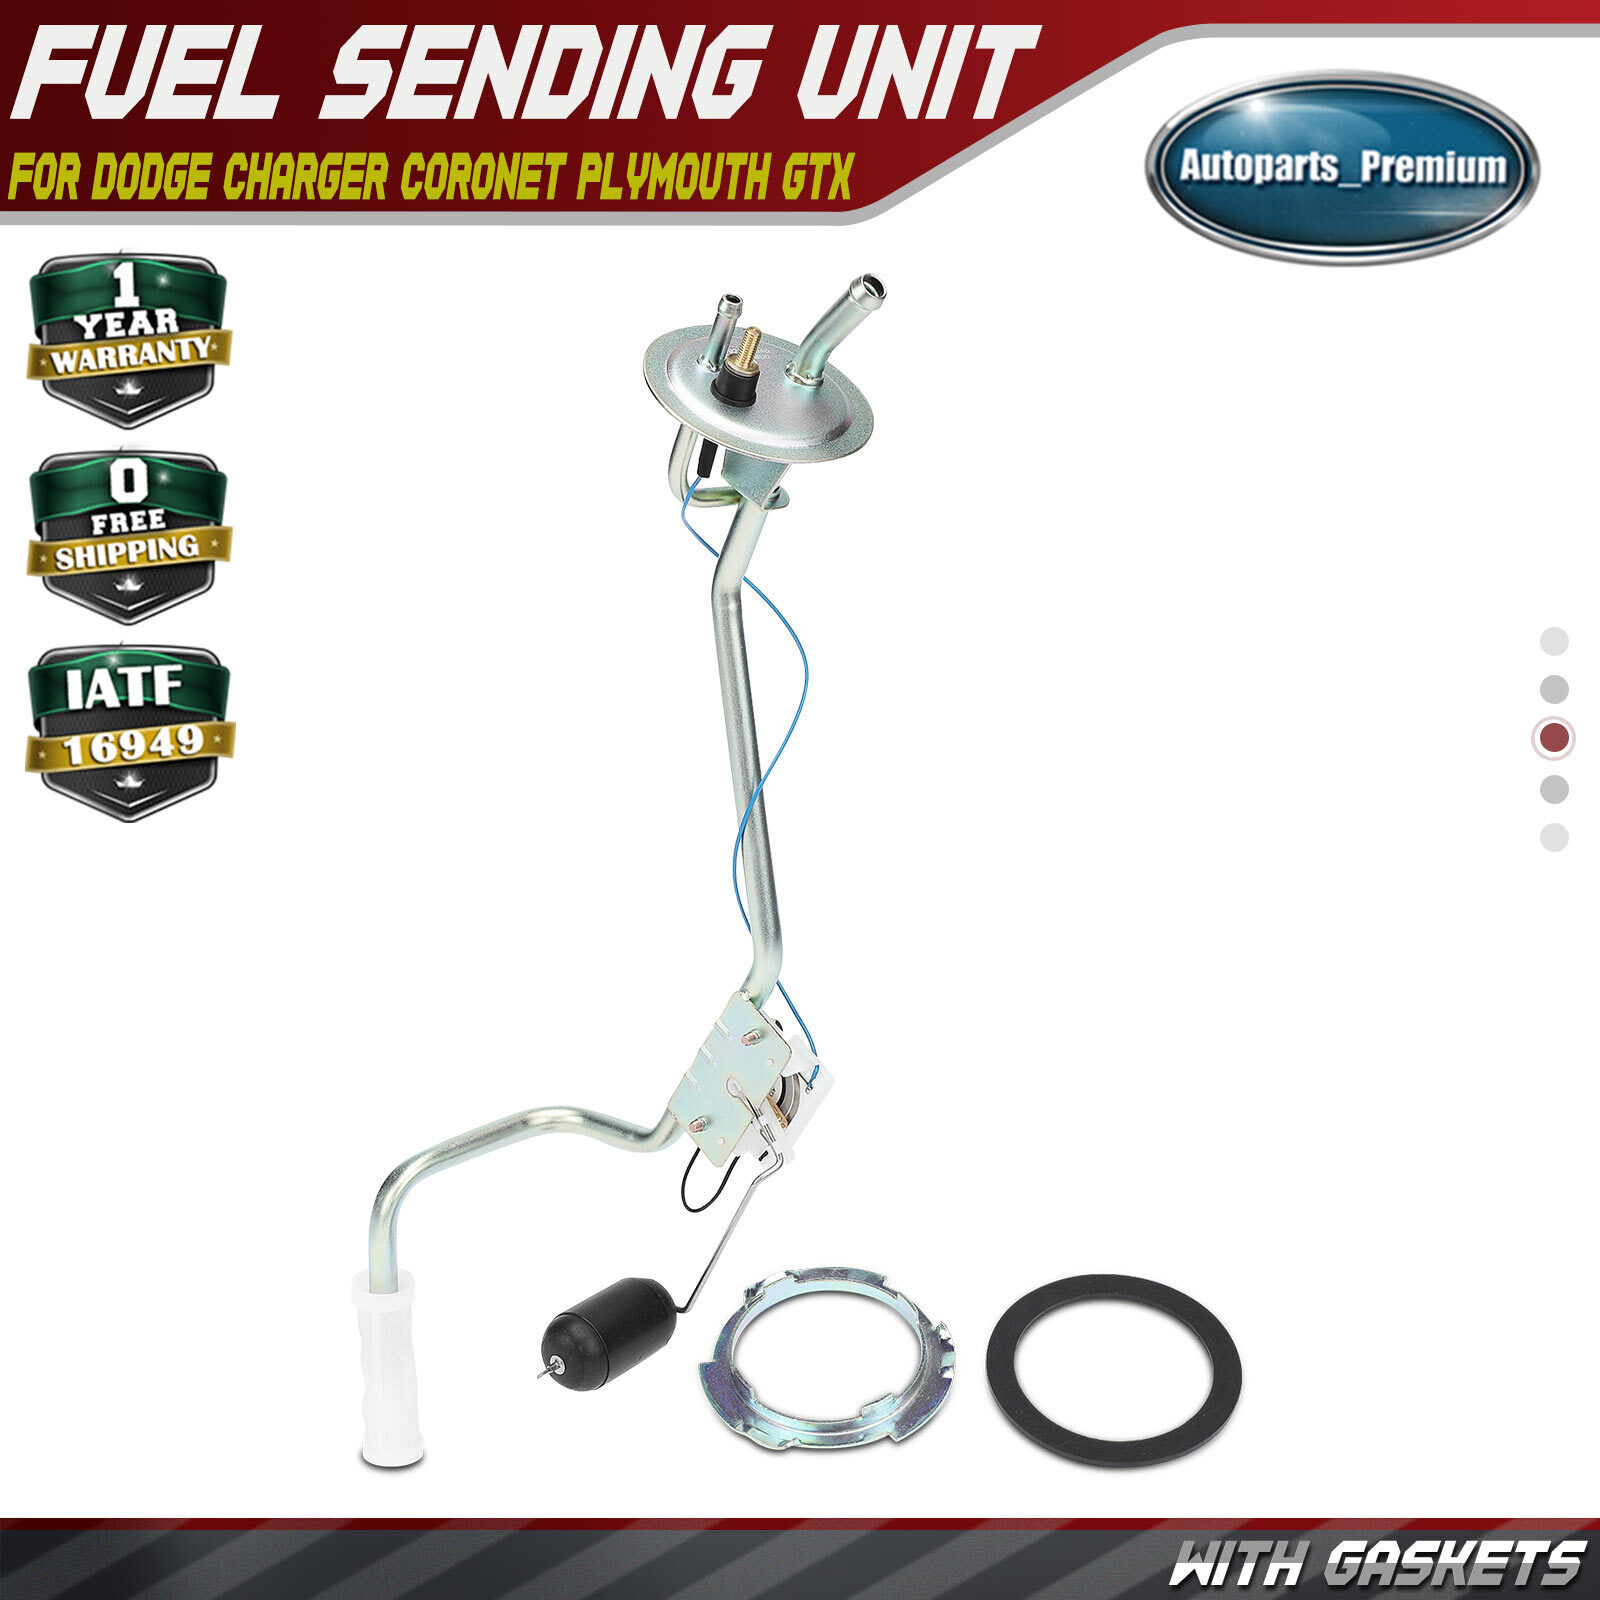 Fuel Tank Sending Unit for Dodge Charger Coronet Plymouth GTX Belvedere 68-70